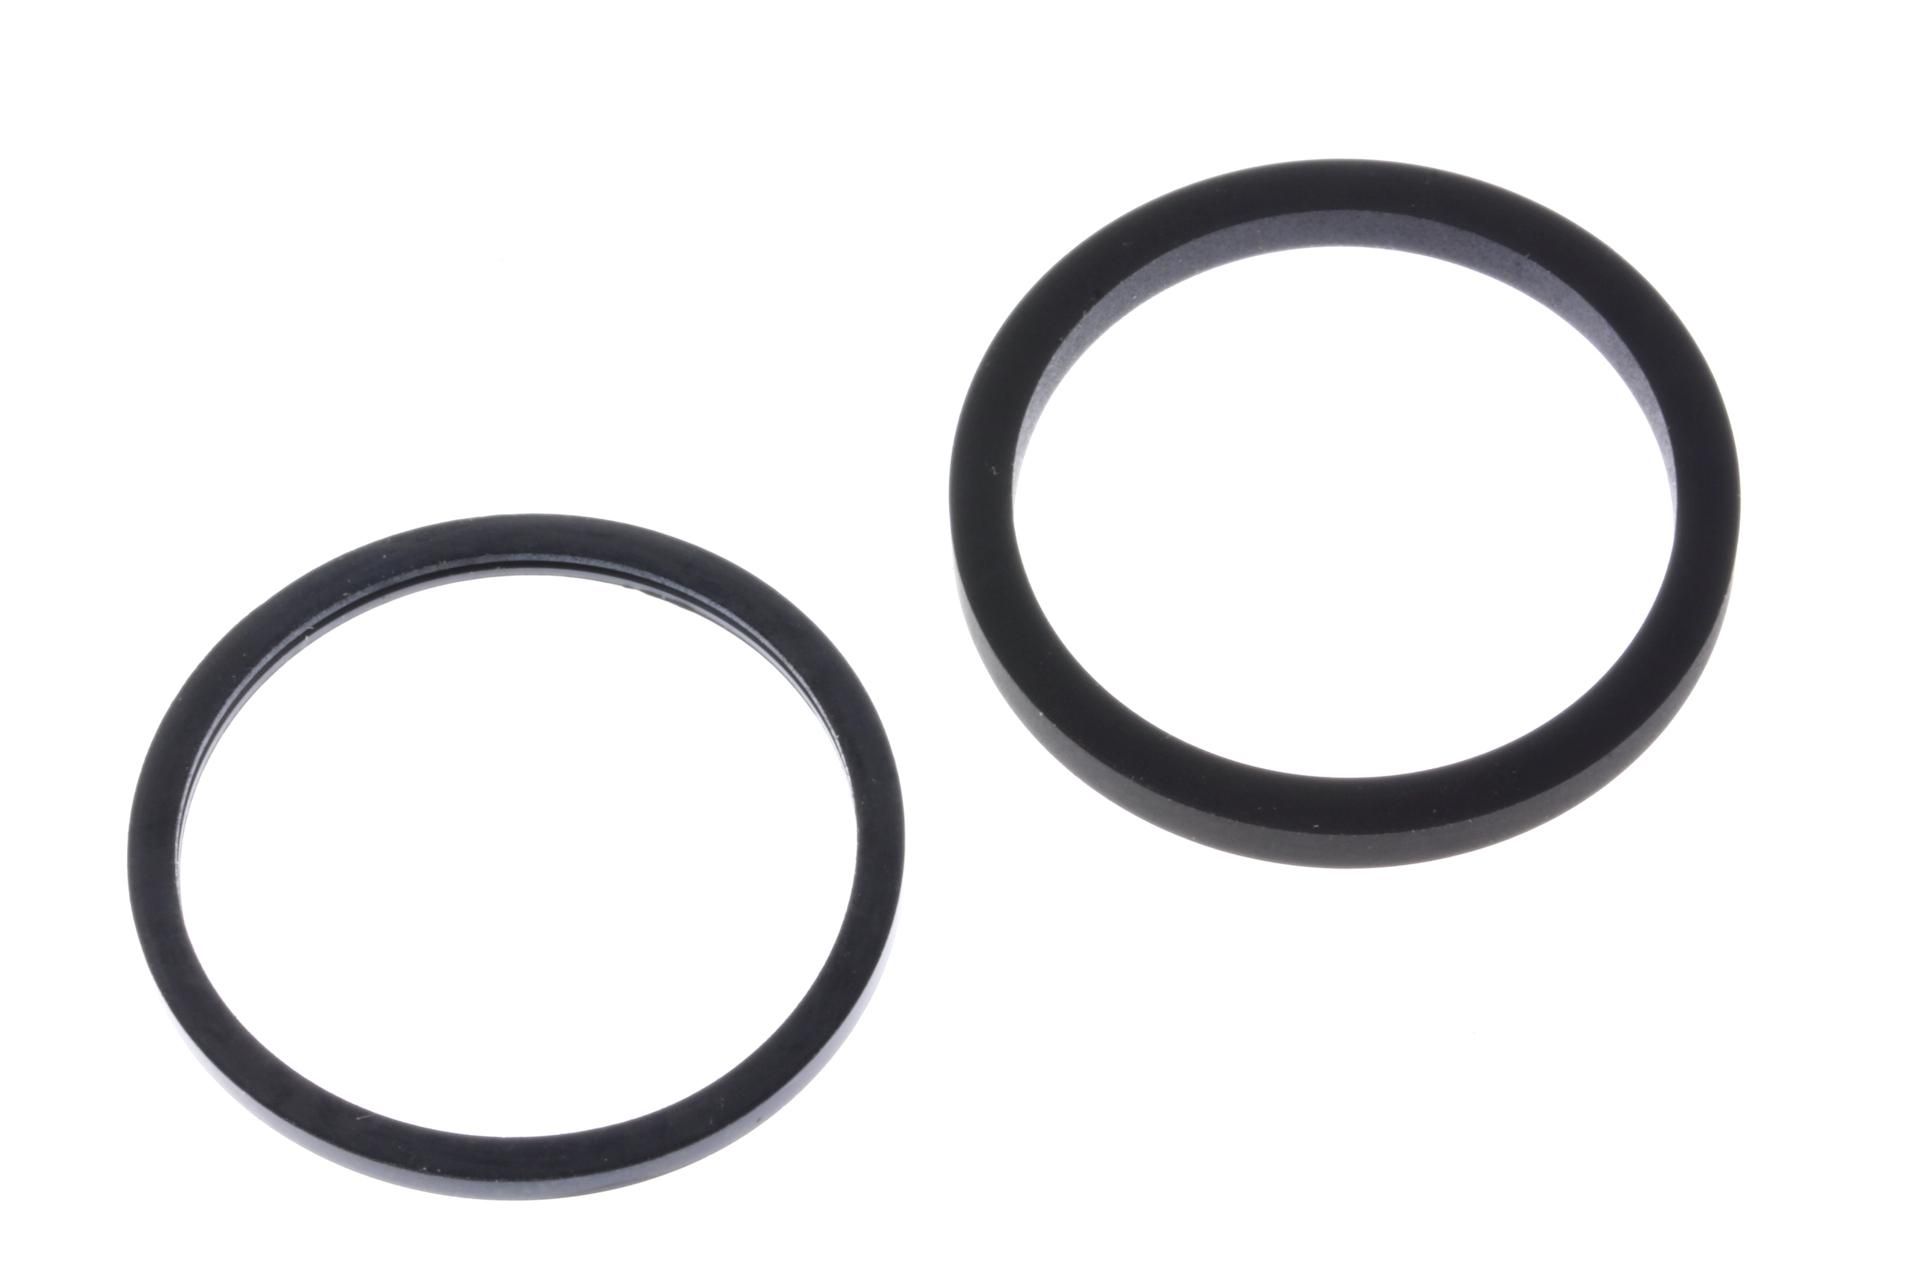 3JD-W0047-50-00 Superseded by 3JD-25803-50-00 - CALIPER SEAL KIT